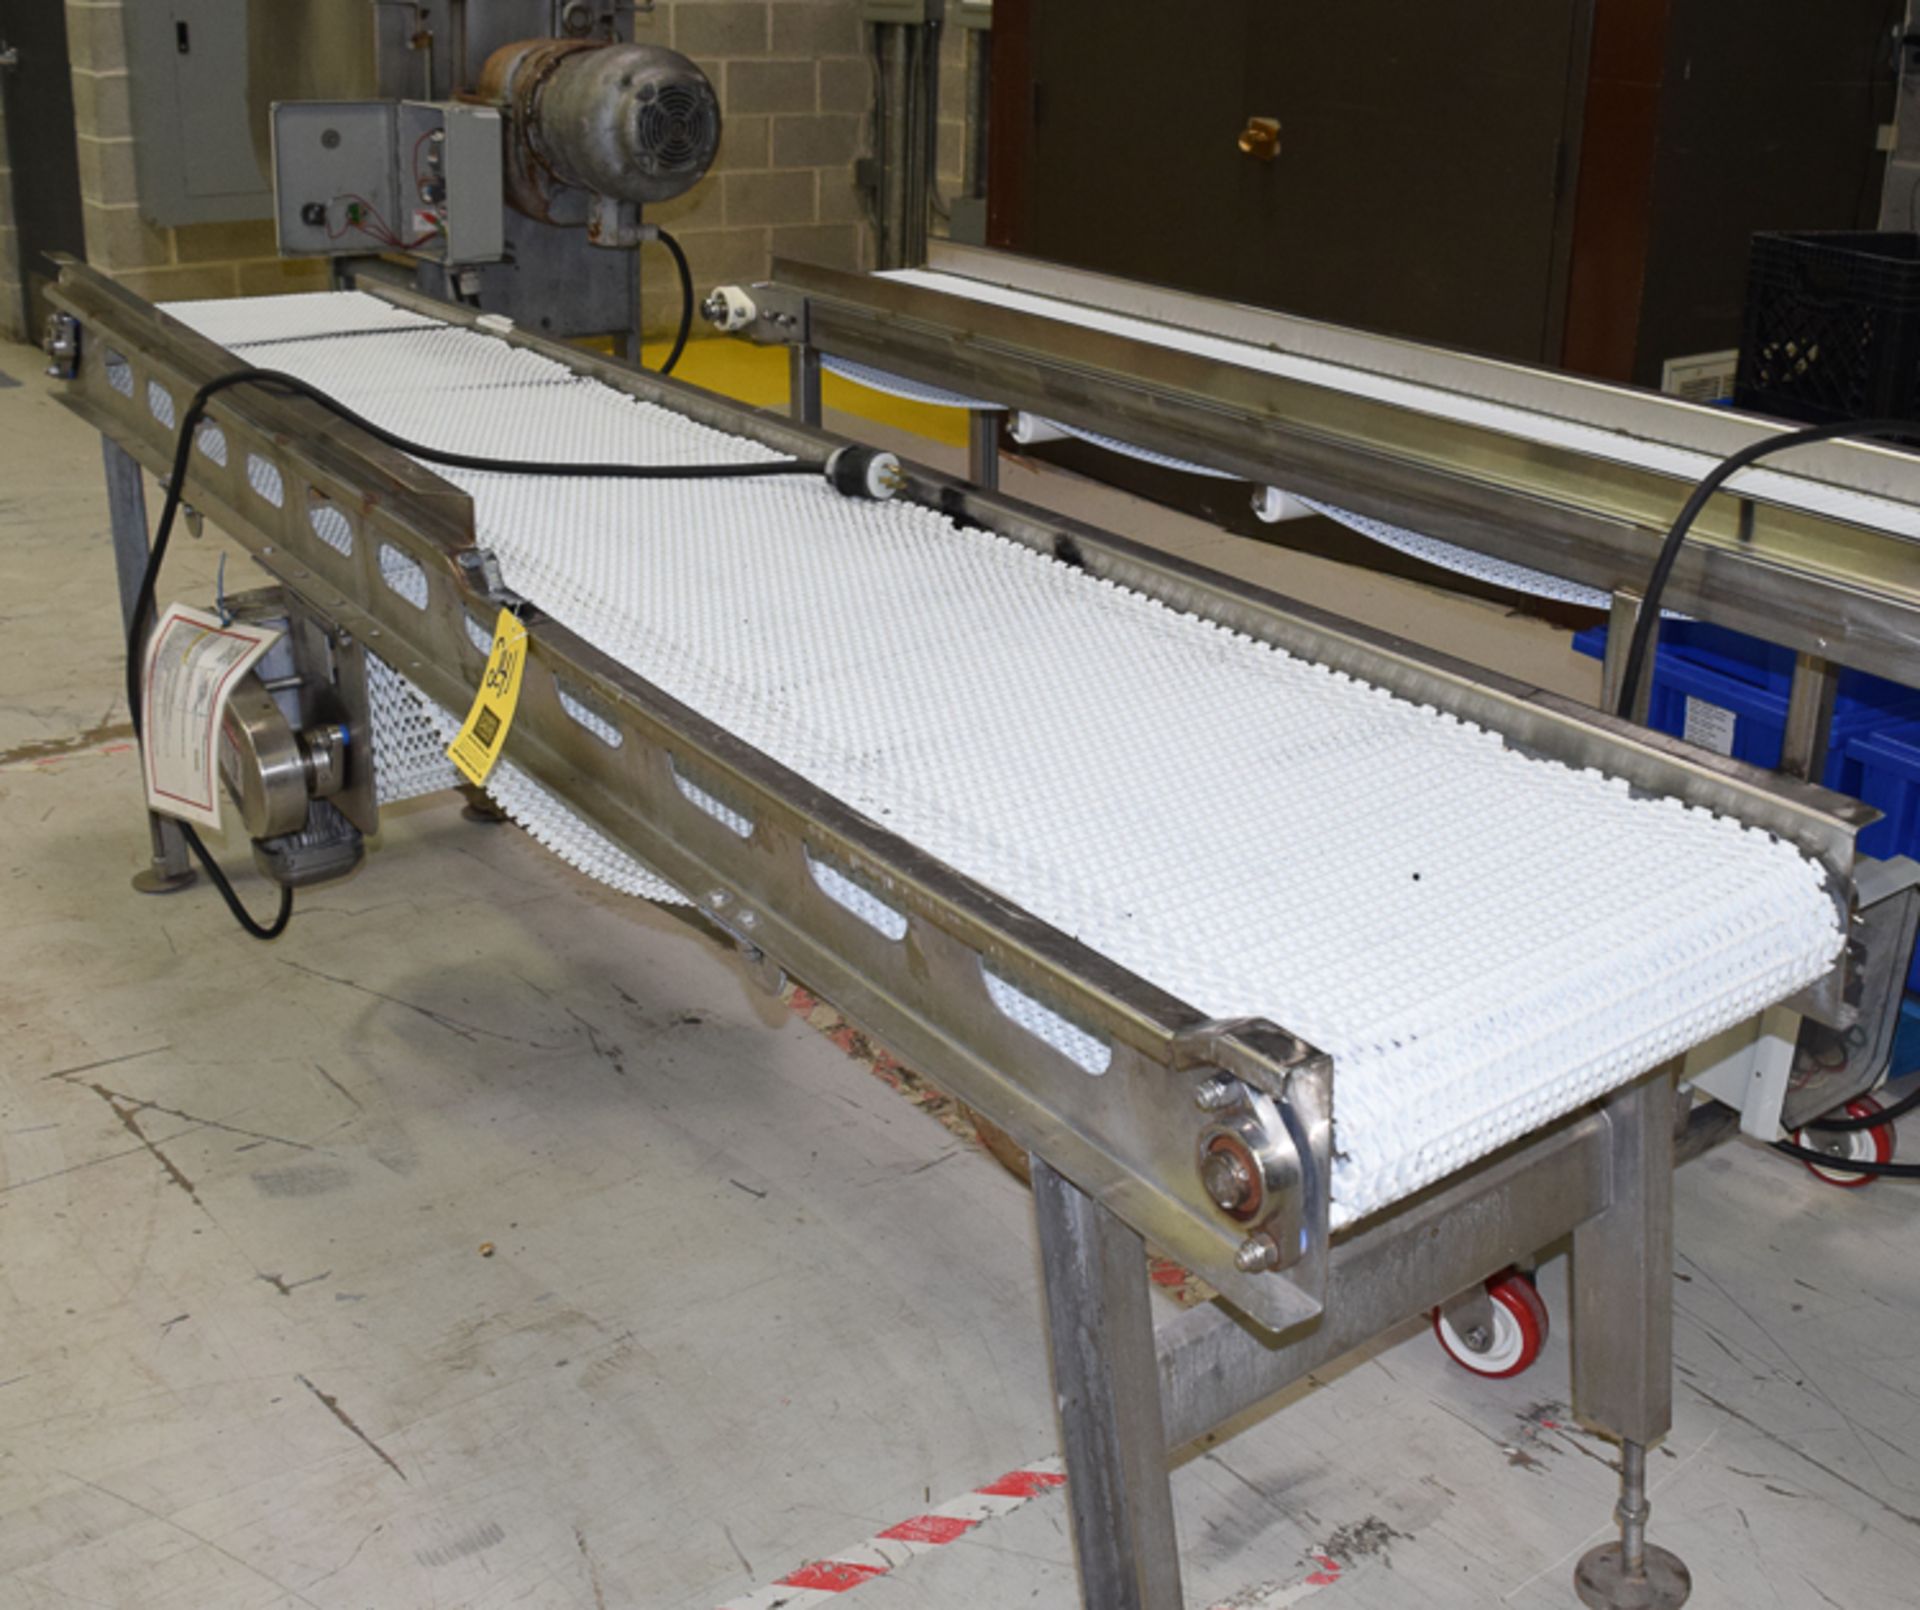 18"" x 118"" S/S Frame Product Conveyor with Interlox Belt and Drive, Rigging Fee: Please Contact US